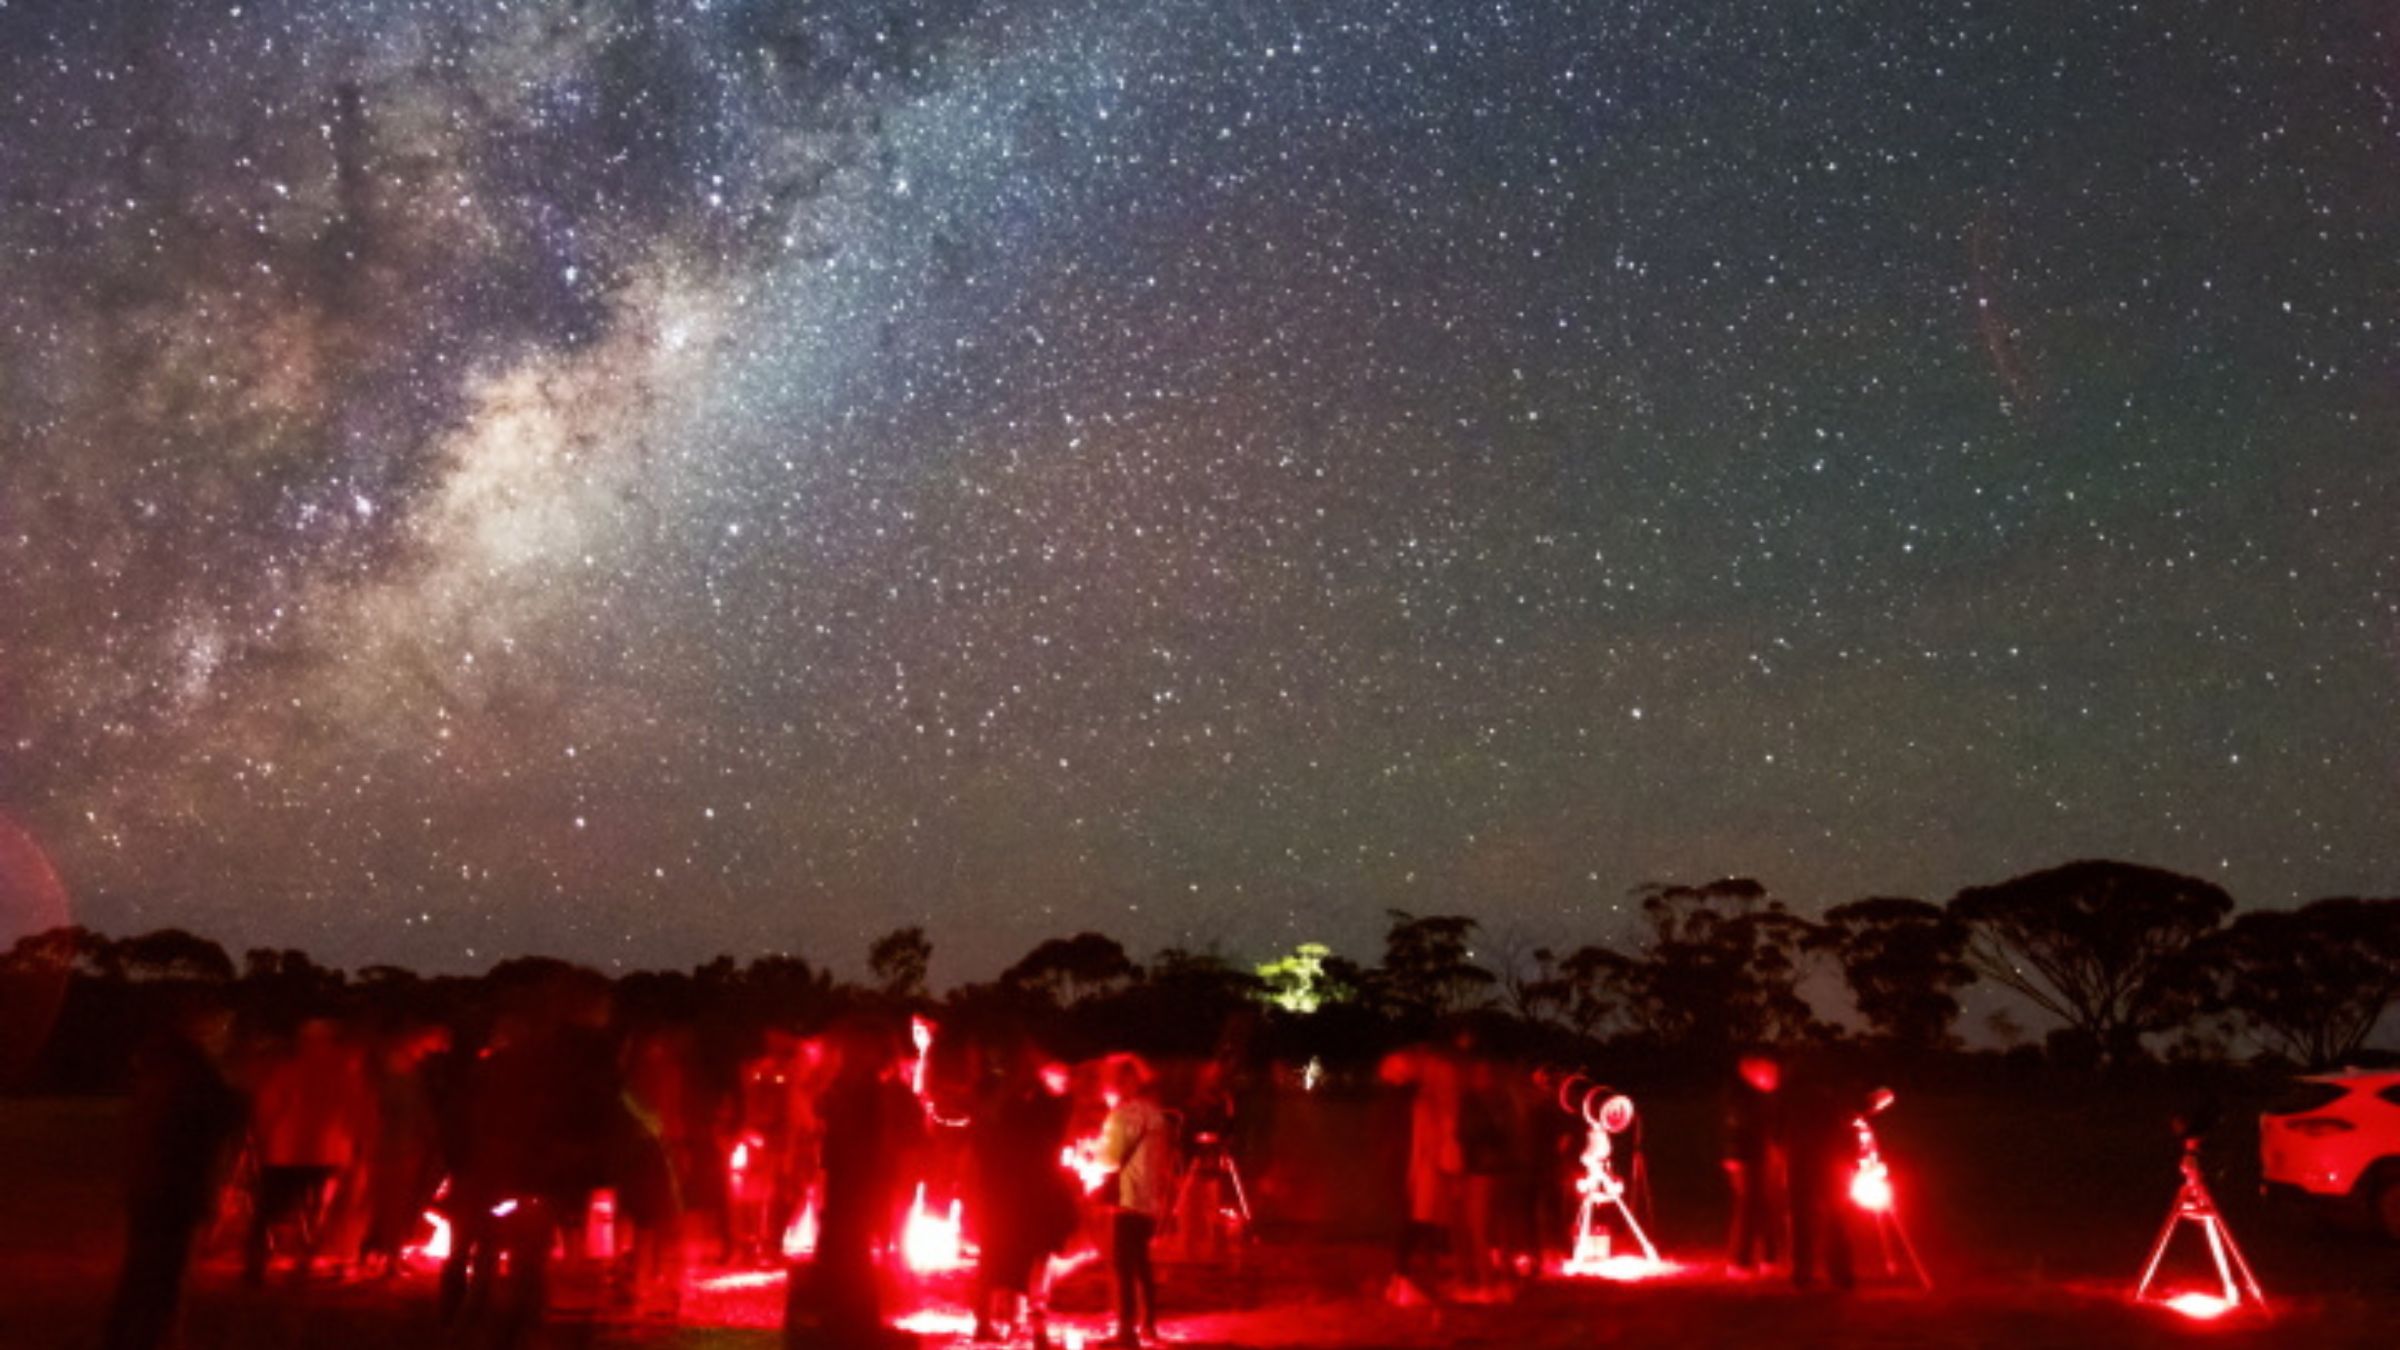 Stargazing Discovery Tour to promote dark sky tourism to eclipse chasers